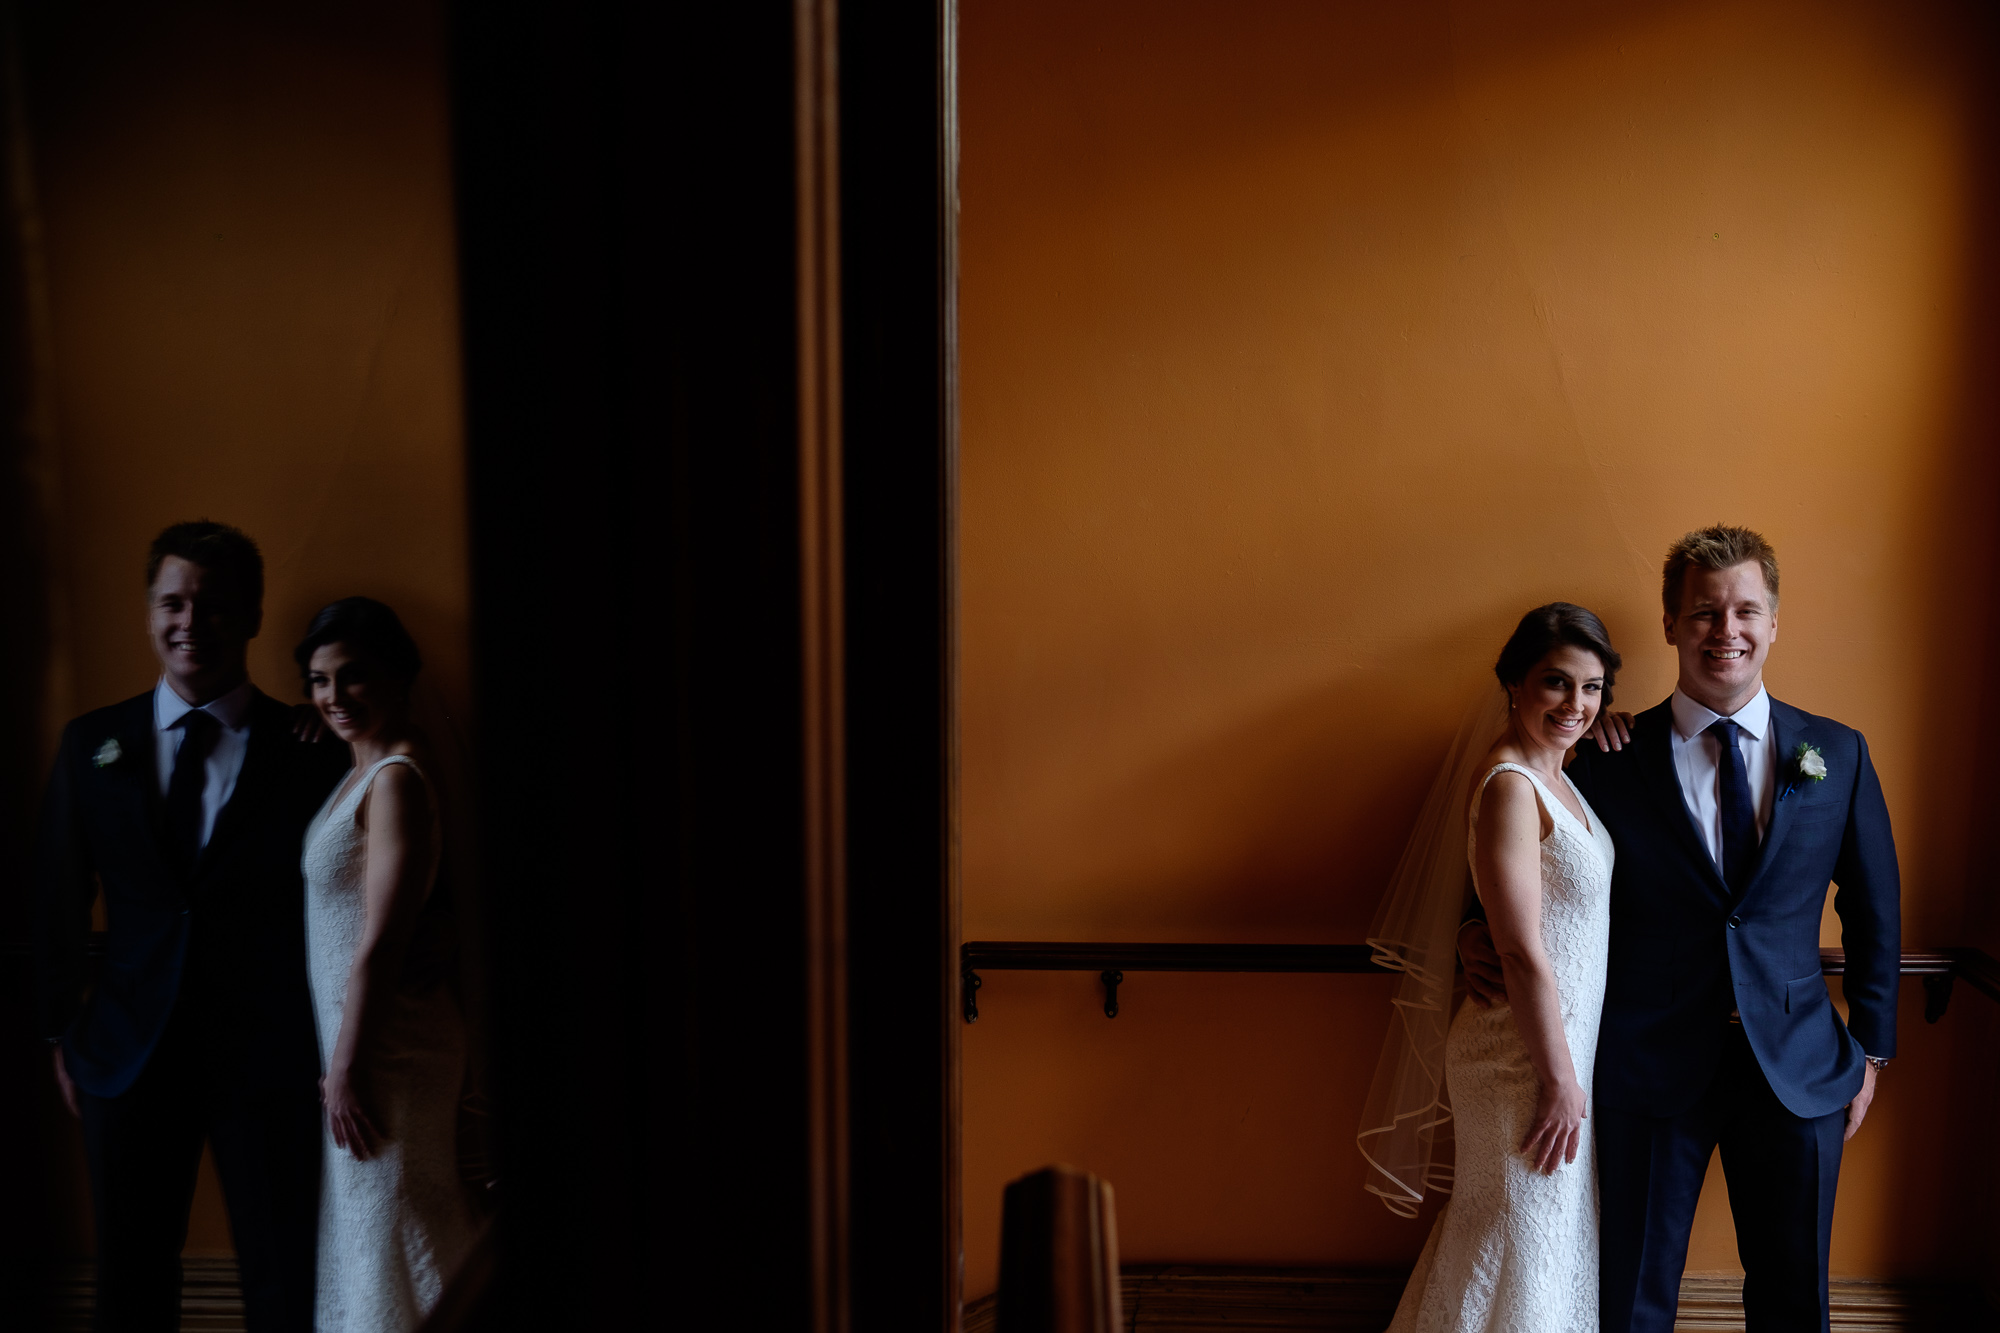  Emilie and John pose for a wedding portrait at the Gladstone Hotel. 